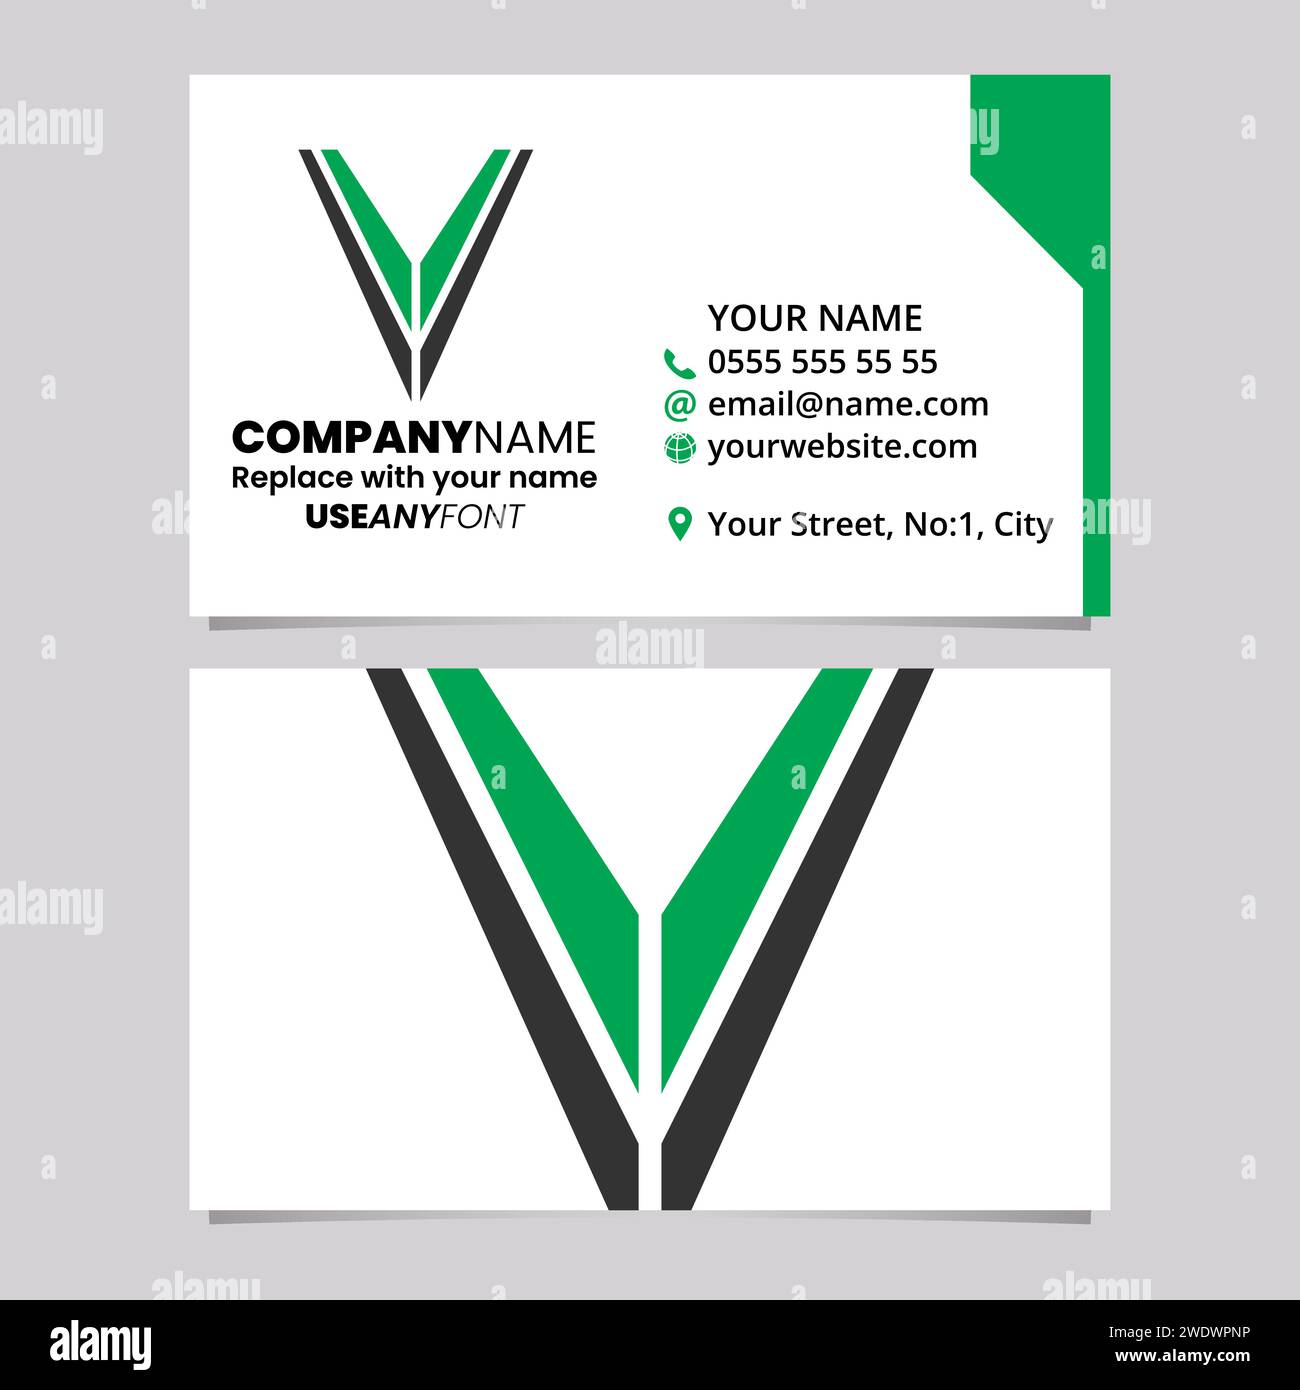 Green and Black Business Card Template with Striped Shaped Letter V Logo Icon Over a Light Grey Background Stock Vector